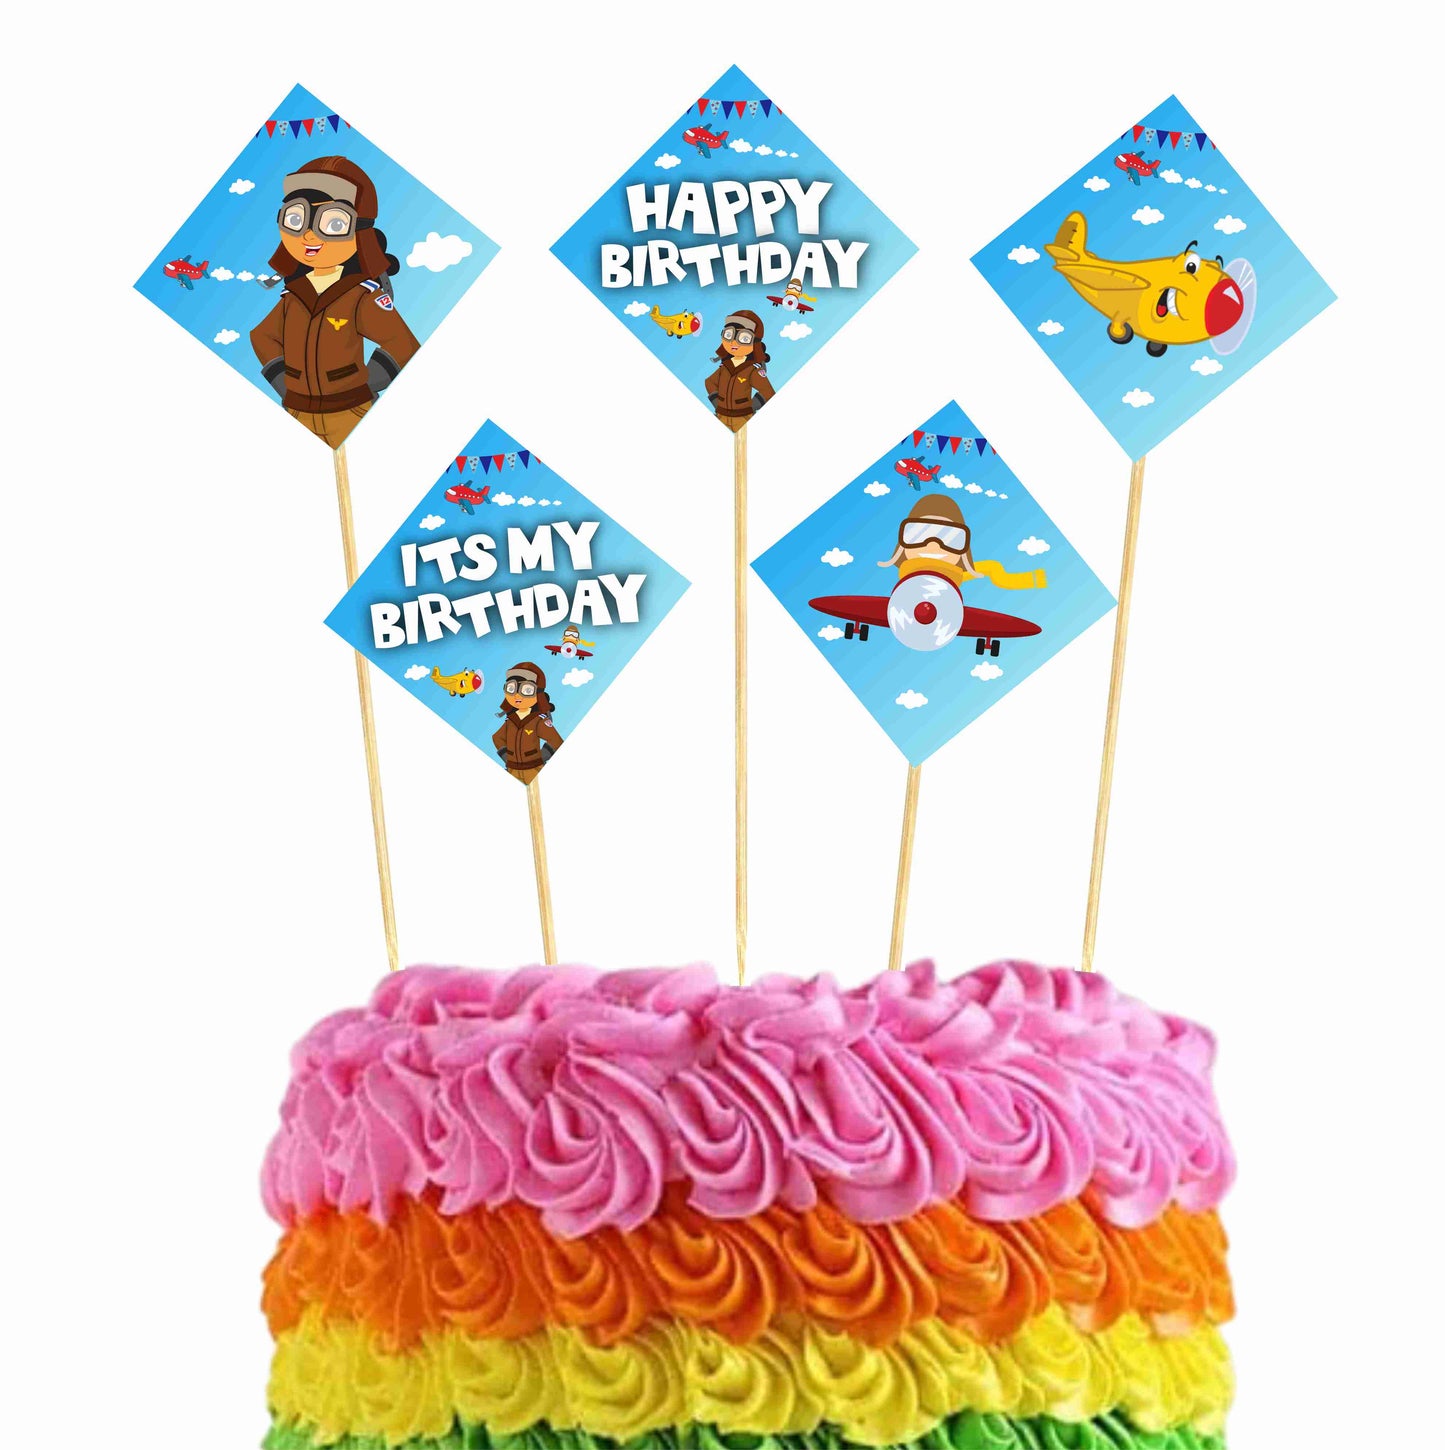 Pilot Theme Cake Topper Pack of 10 Nos for Birthday Cake Decoration Theme Party Item For Boys Girls Adults Birthday Theme Decor